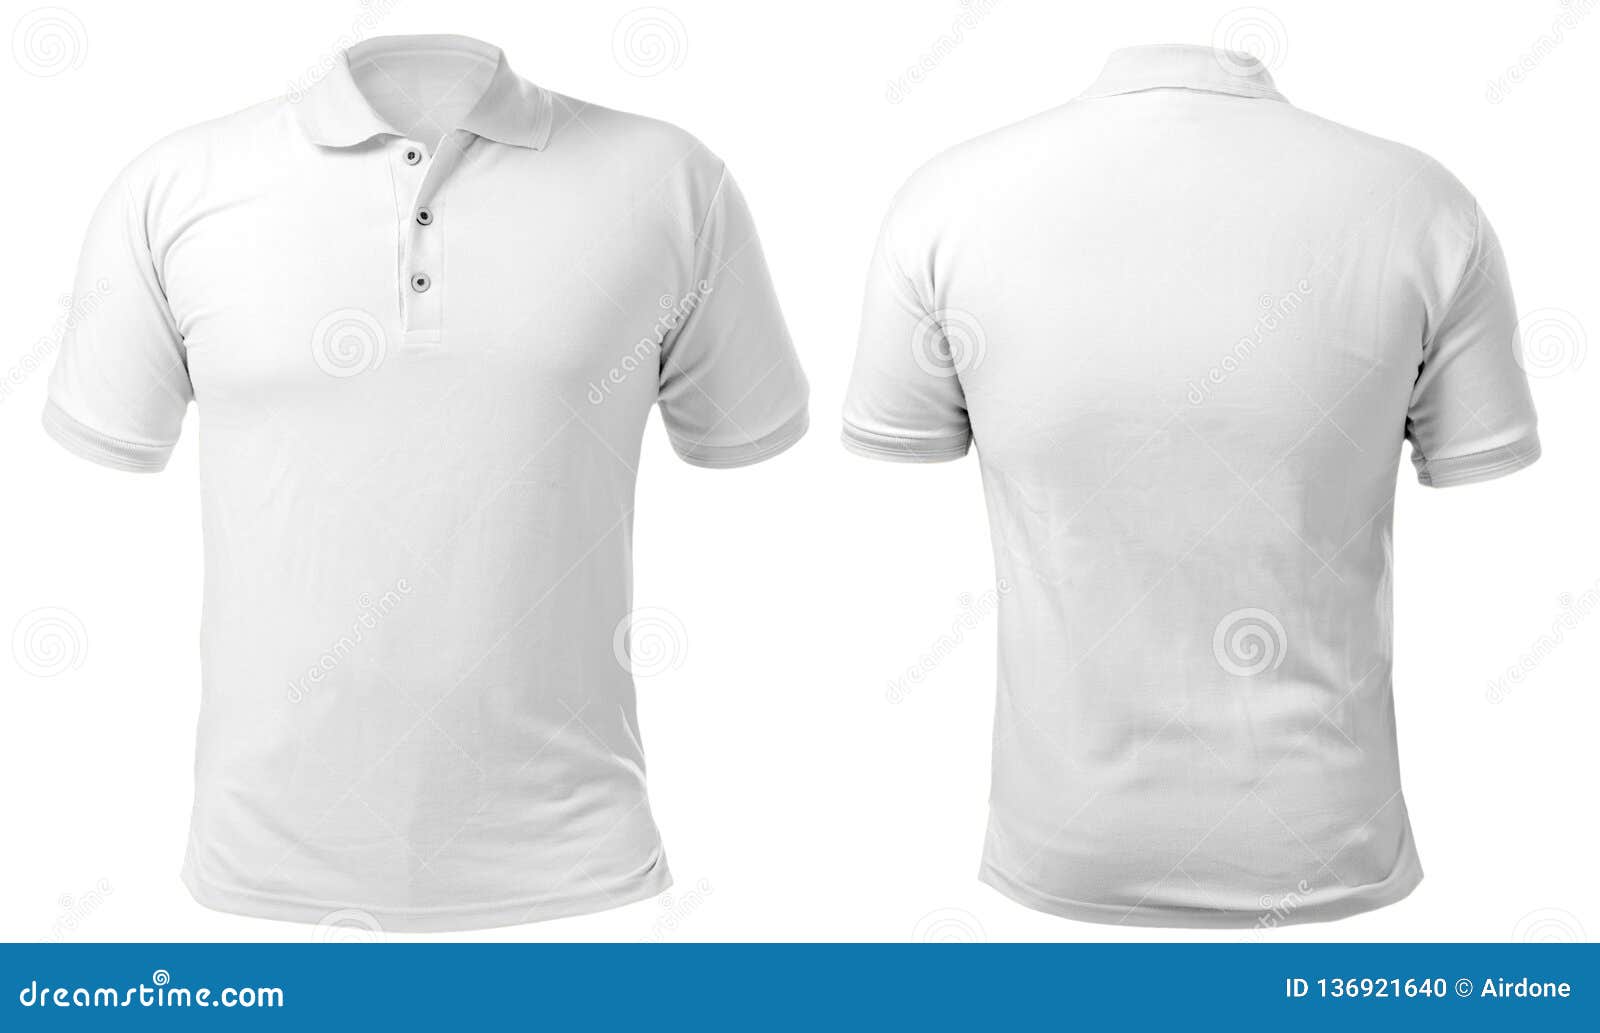 White Collared Shirt Design Template Stock Photo - Image of collection